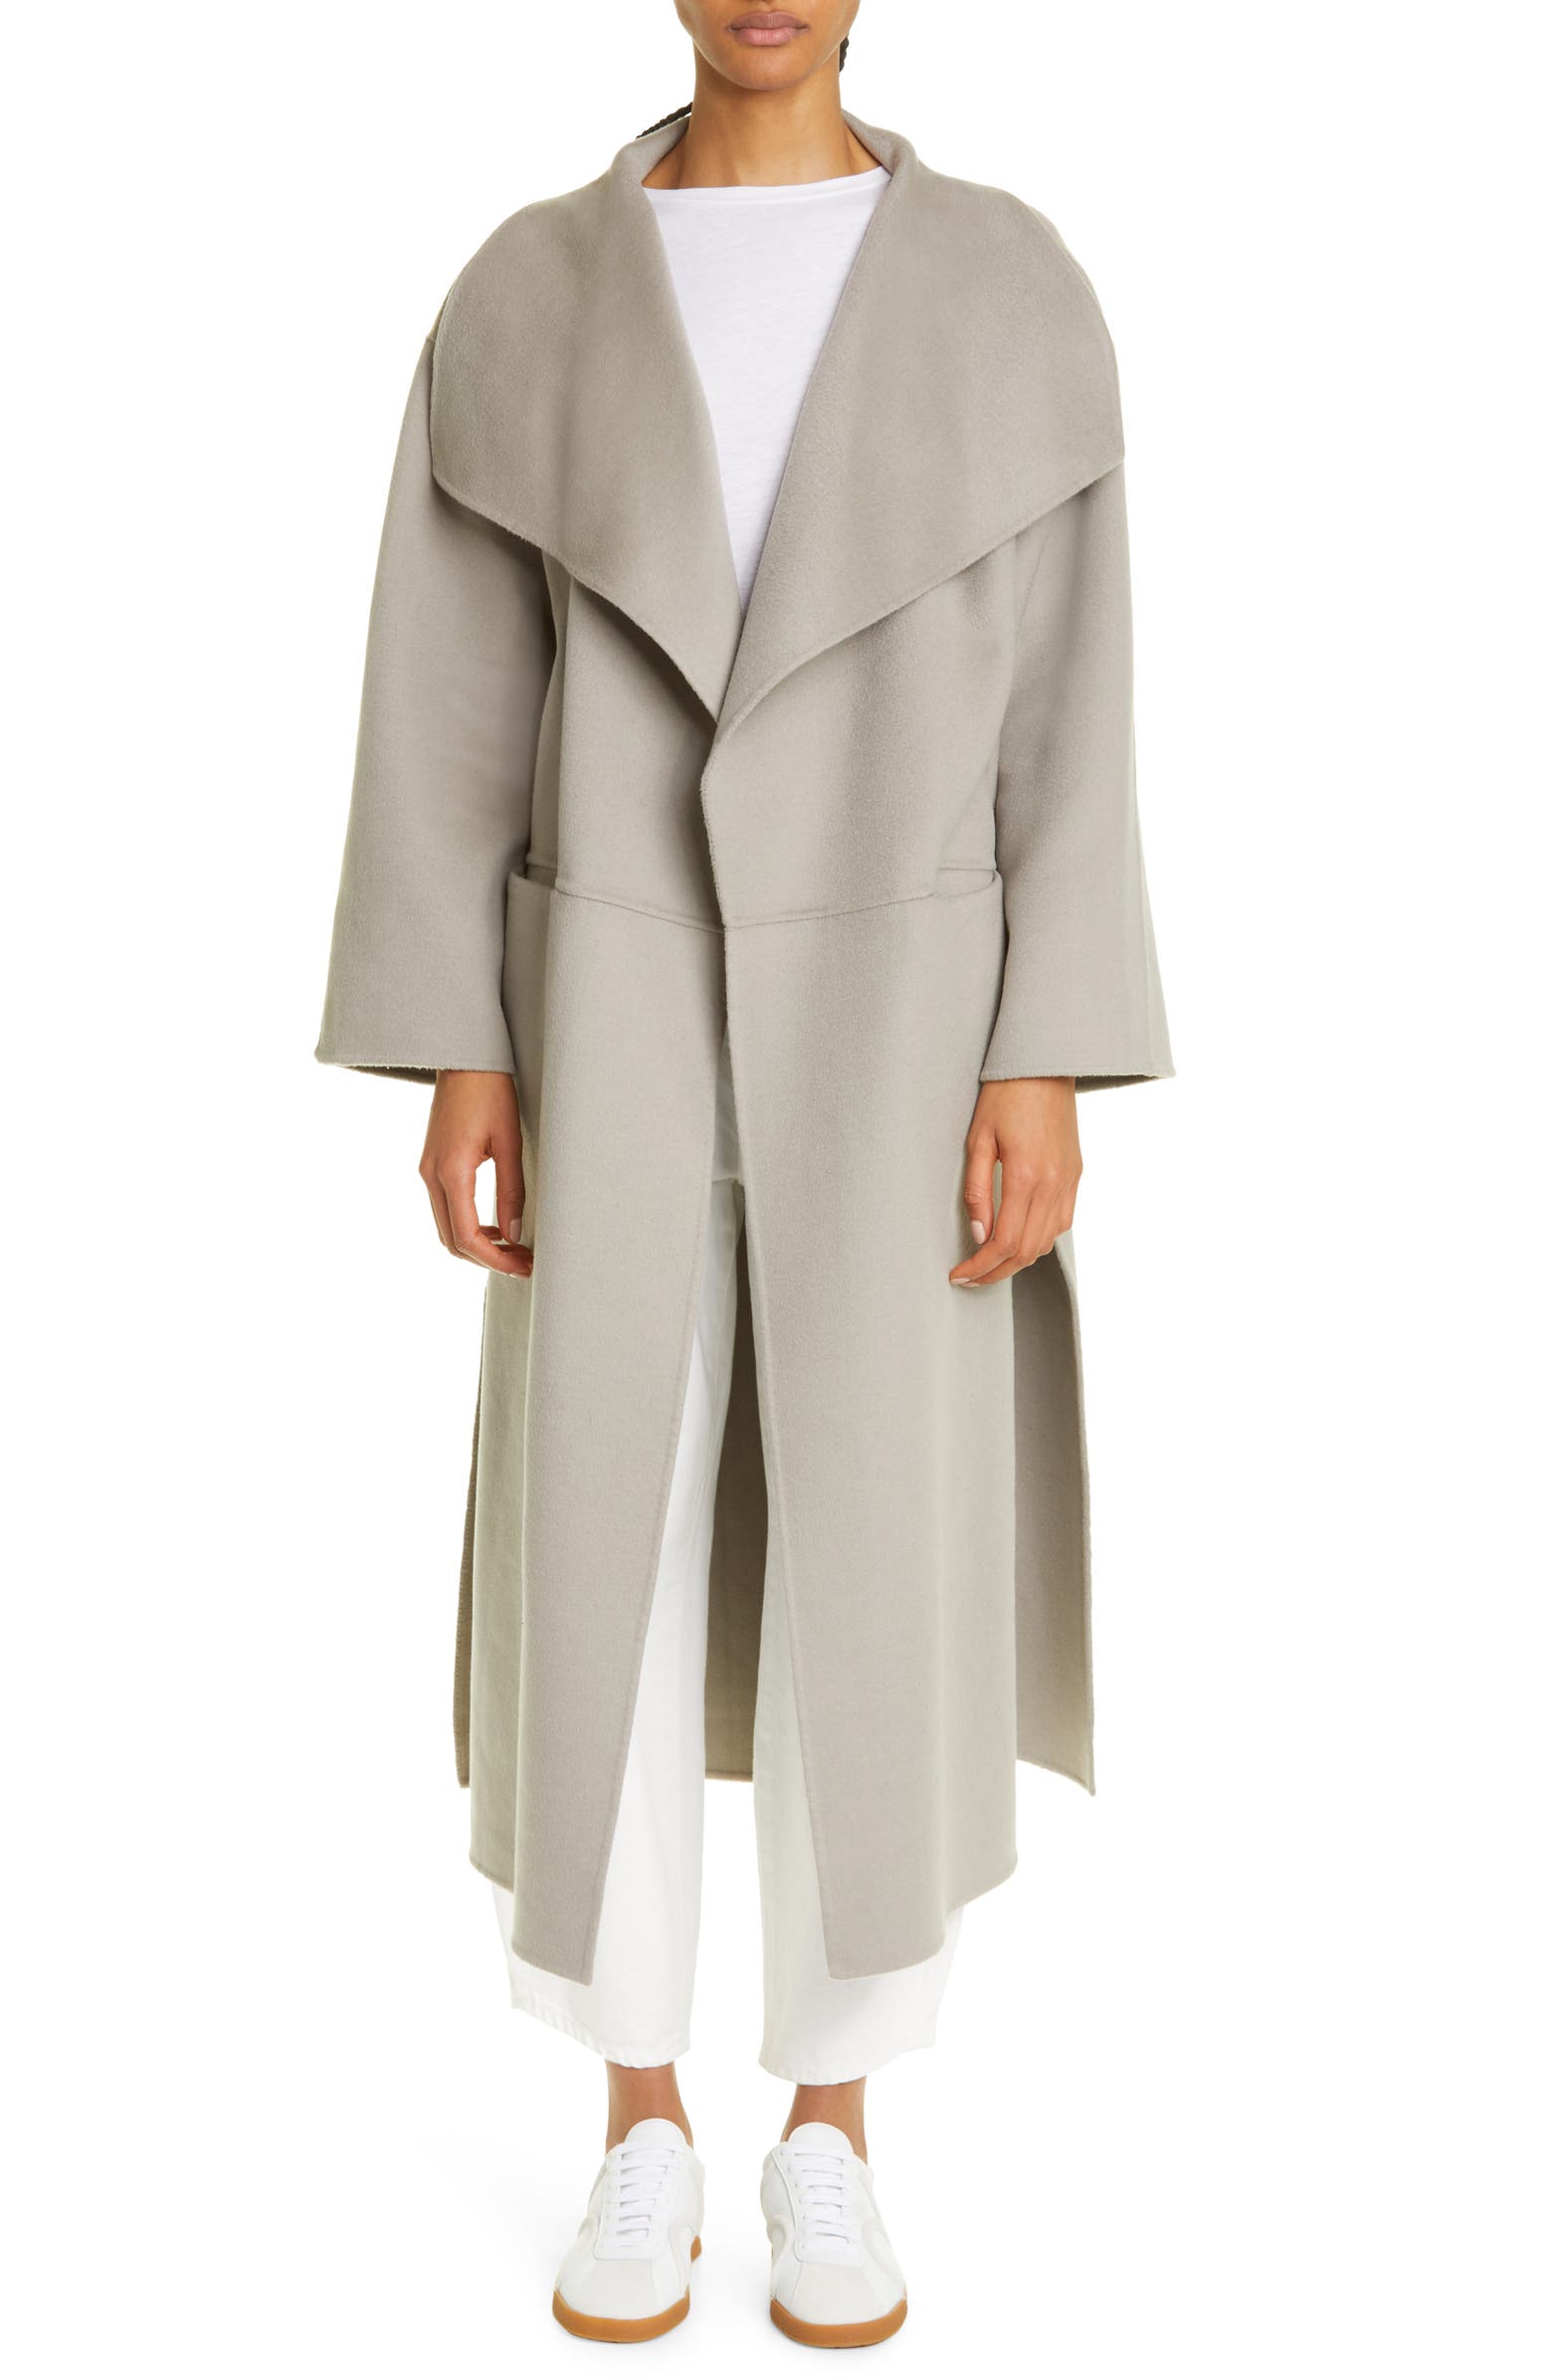 Totême Annecy Open Front Wool & Cashmere Coat | Nordstrom